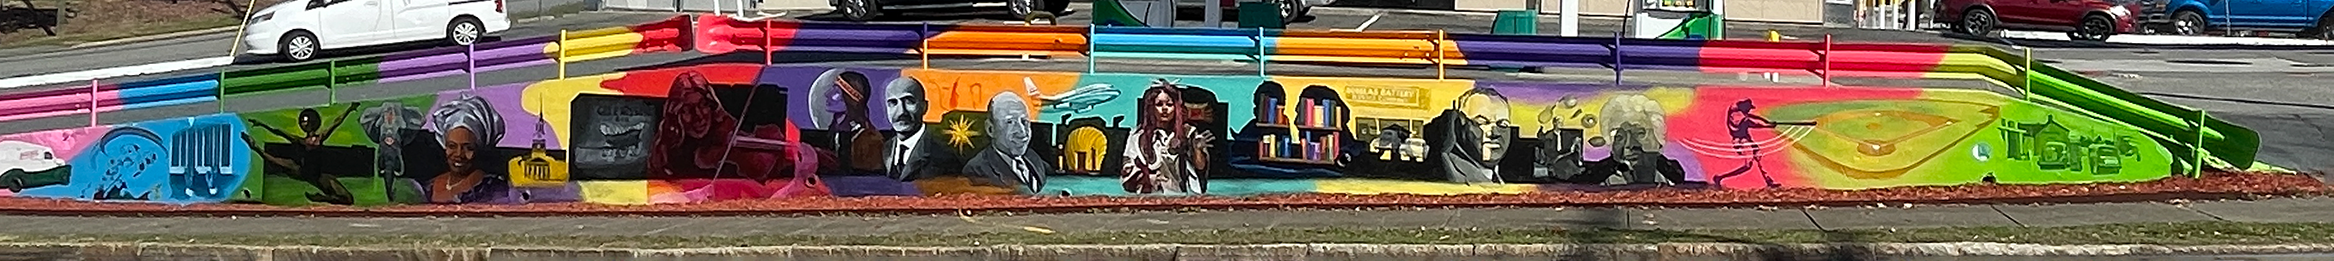 A photo of the mural at the Quality Mart on the corner of Broad and 5th street, featuring many figures and cultural elements. Painted by Leo Rucker.